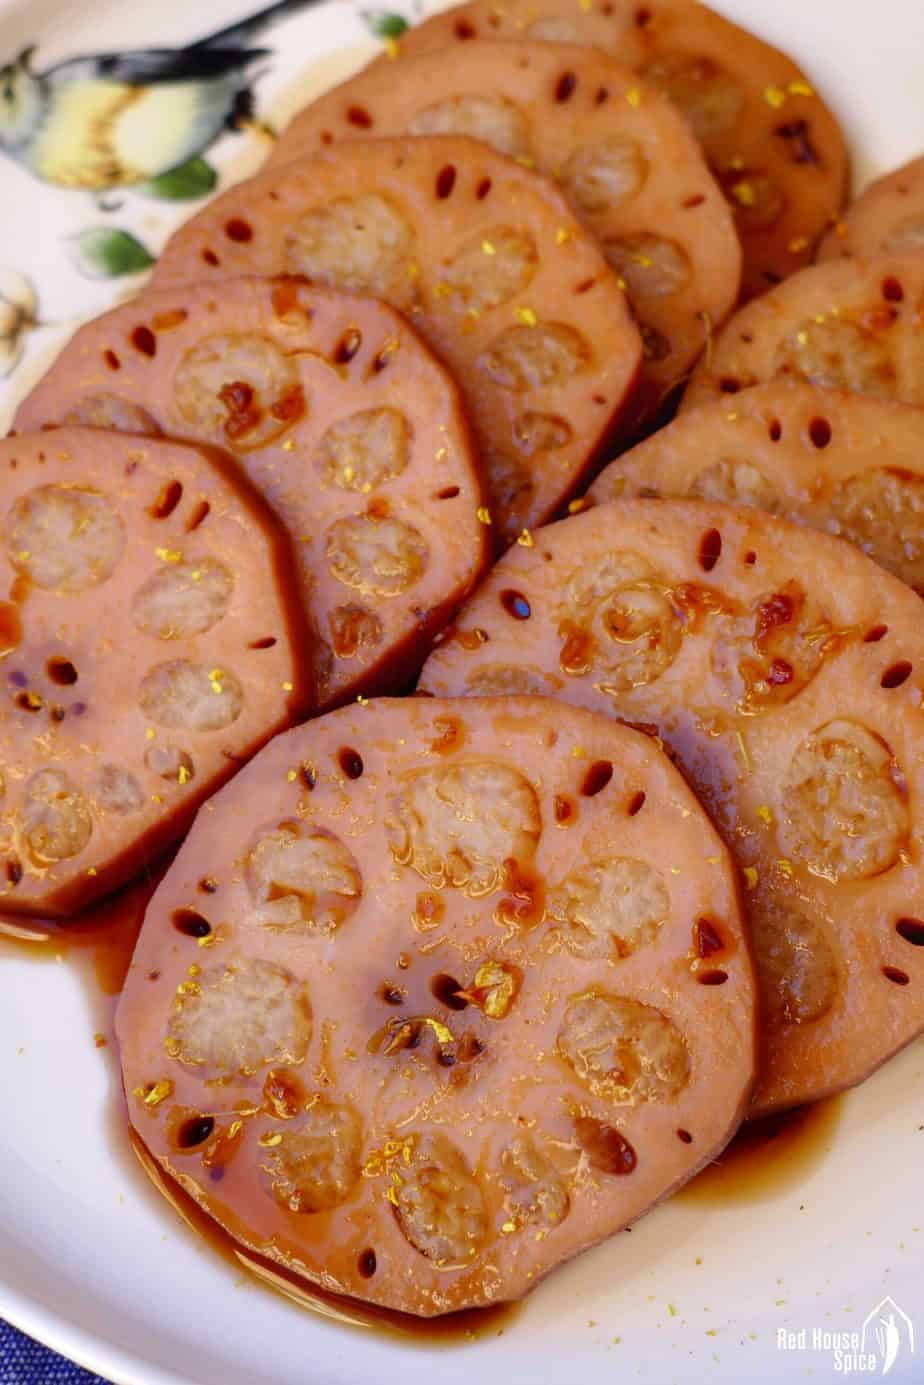 sliced lotus root stuffed with sticky rice